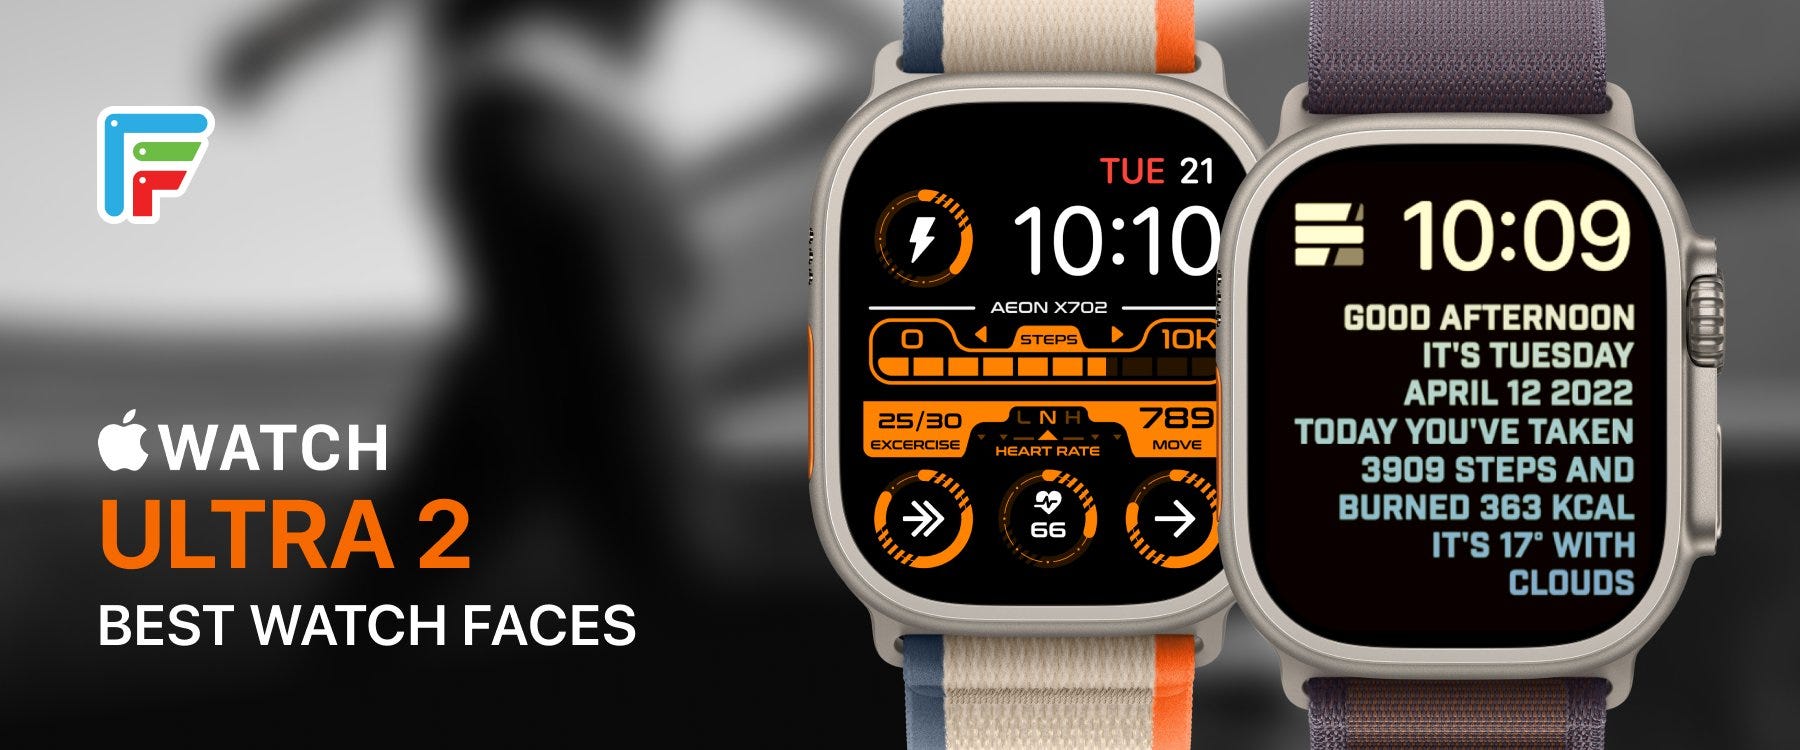 Elevate Your Style: 9 Must-Have Facer Watch Faces for the Apple Watch Ultra  2, by Ariel Vardi